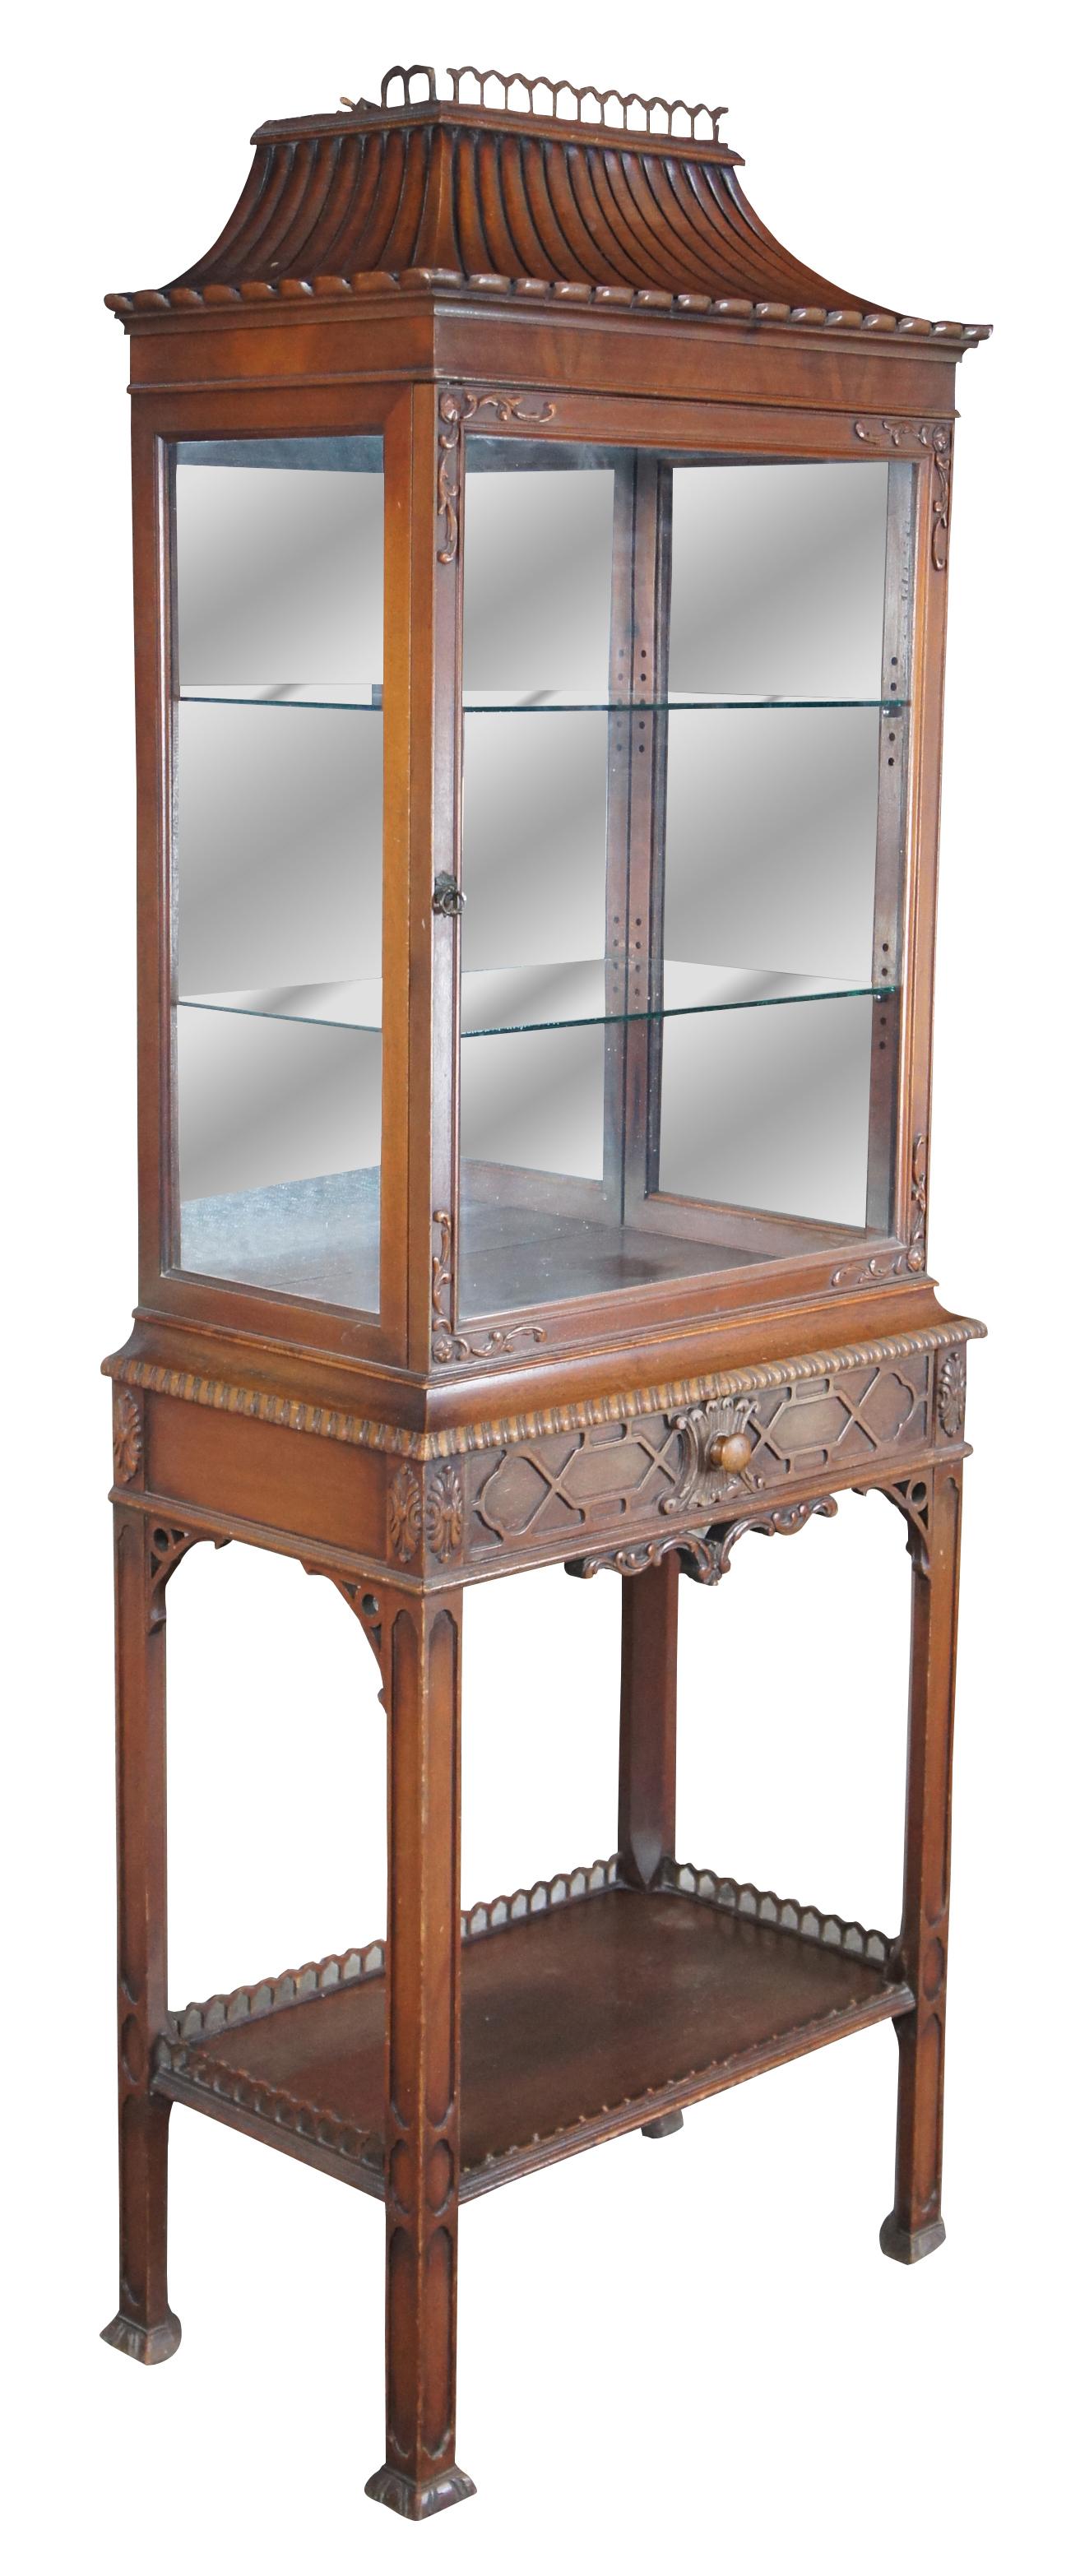 Antique Chinese chippendale display curio or vitrine cabinet, circa 1940s. Pagoda form top, carved door opening to interior with two adjustable height glass shelves, glass sides and a mirrored back. Single drawer below with blind fret front, shelf